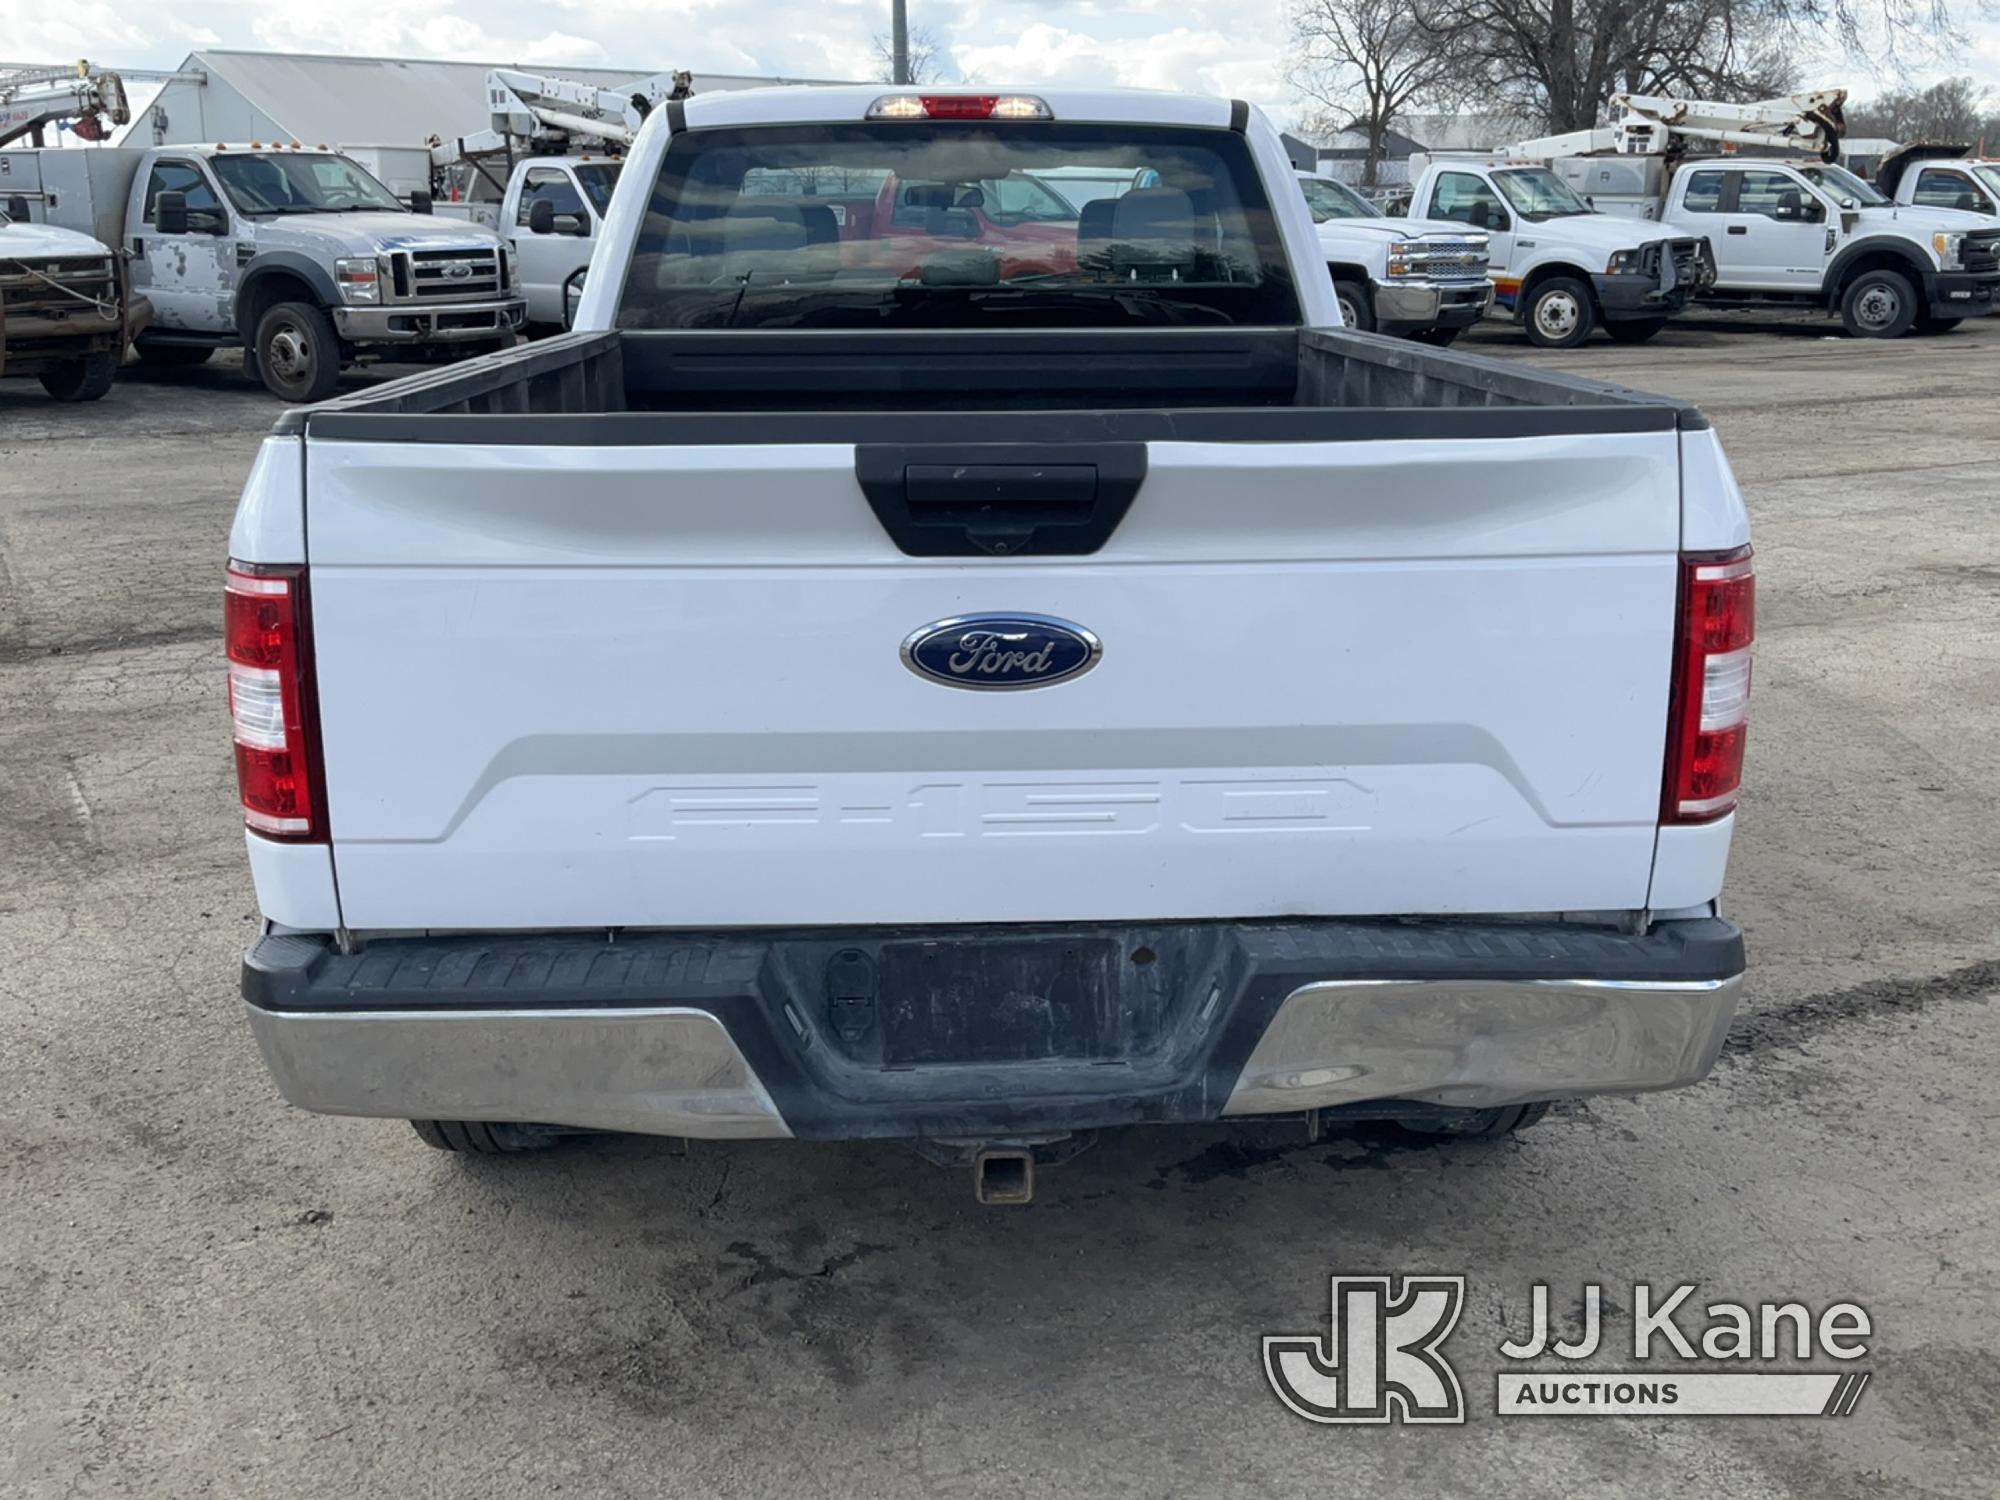 (South Beloit, IL) 2020 Ford F150 Extended-Cab Pickup Truck Runs & Moves) (Check Engine Light On, Mo